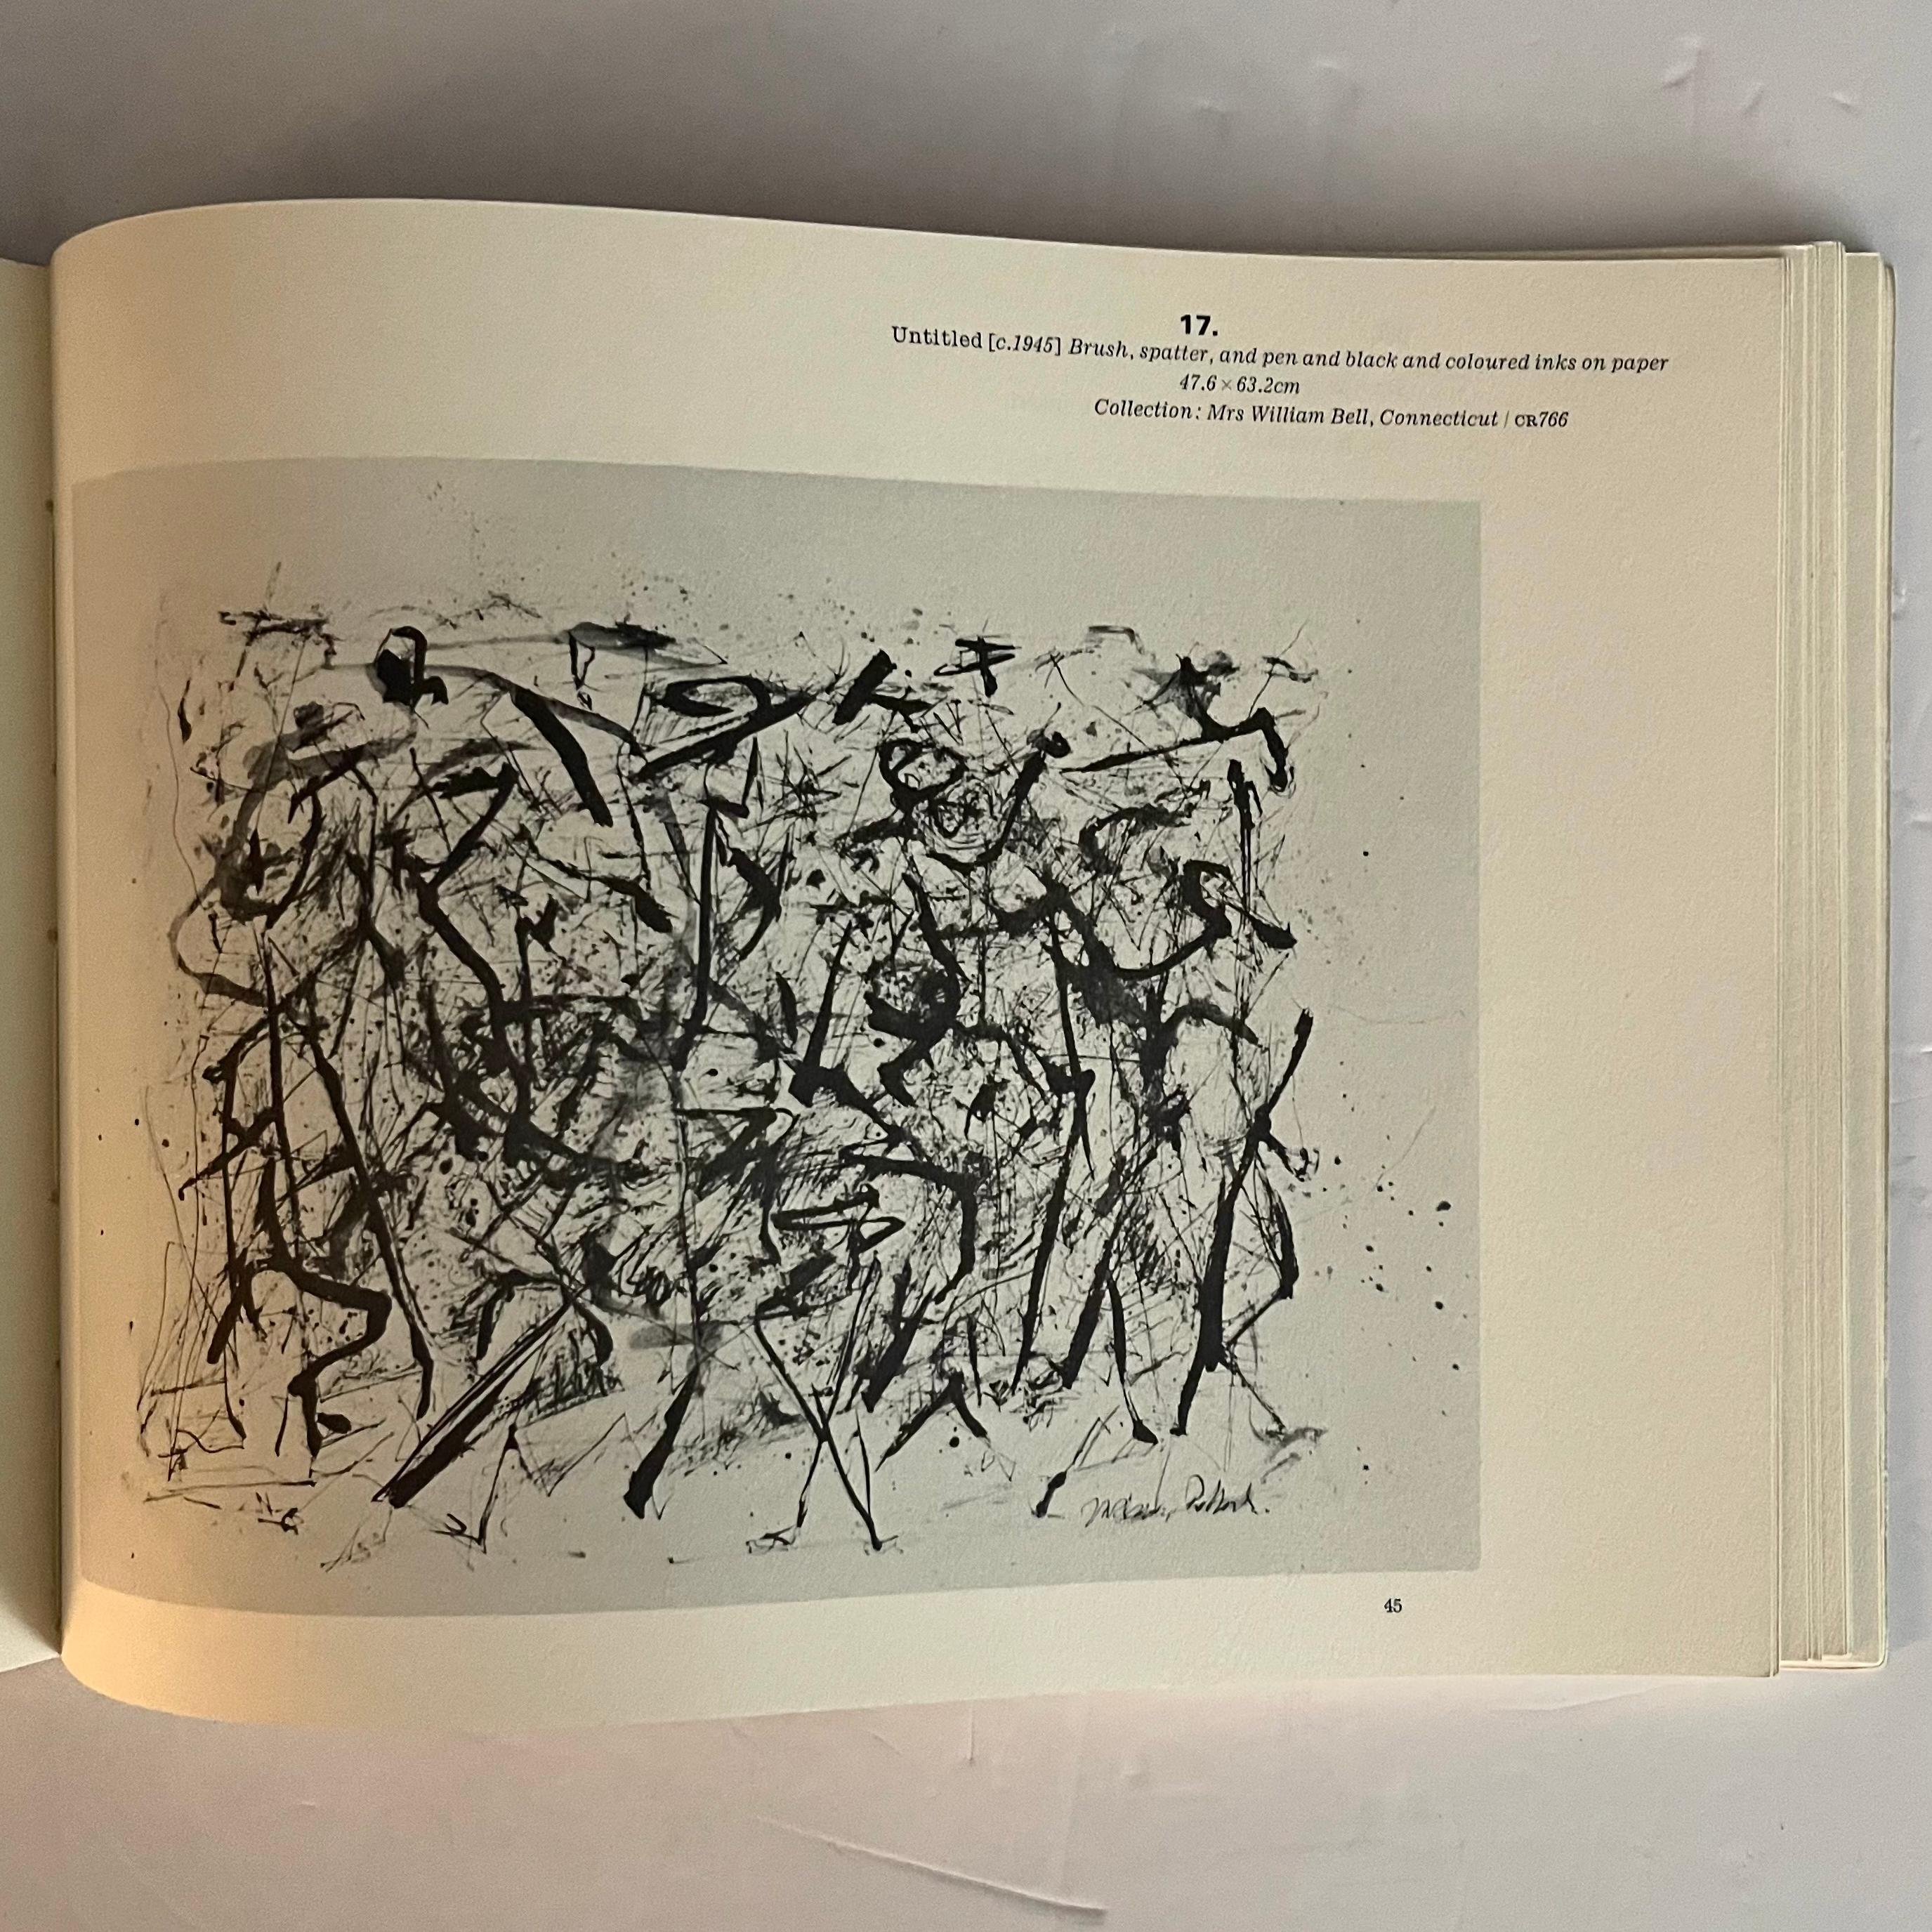 Paper Jackson Pollock: Drawing into Painting - Bernice Rose - 1st edition, 1980